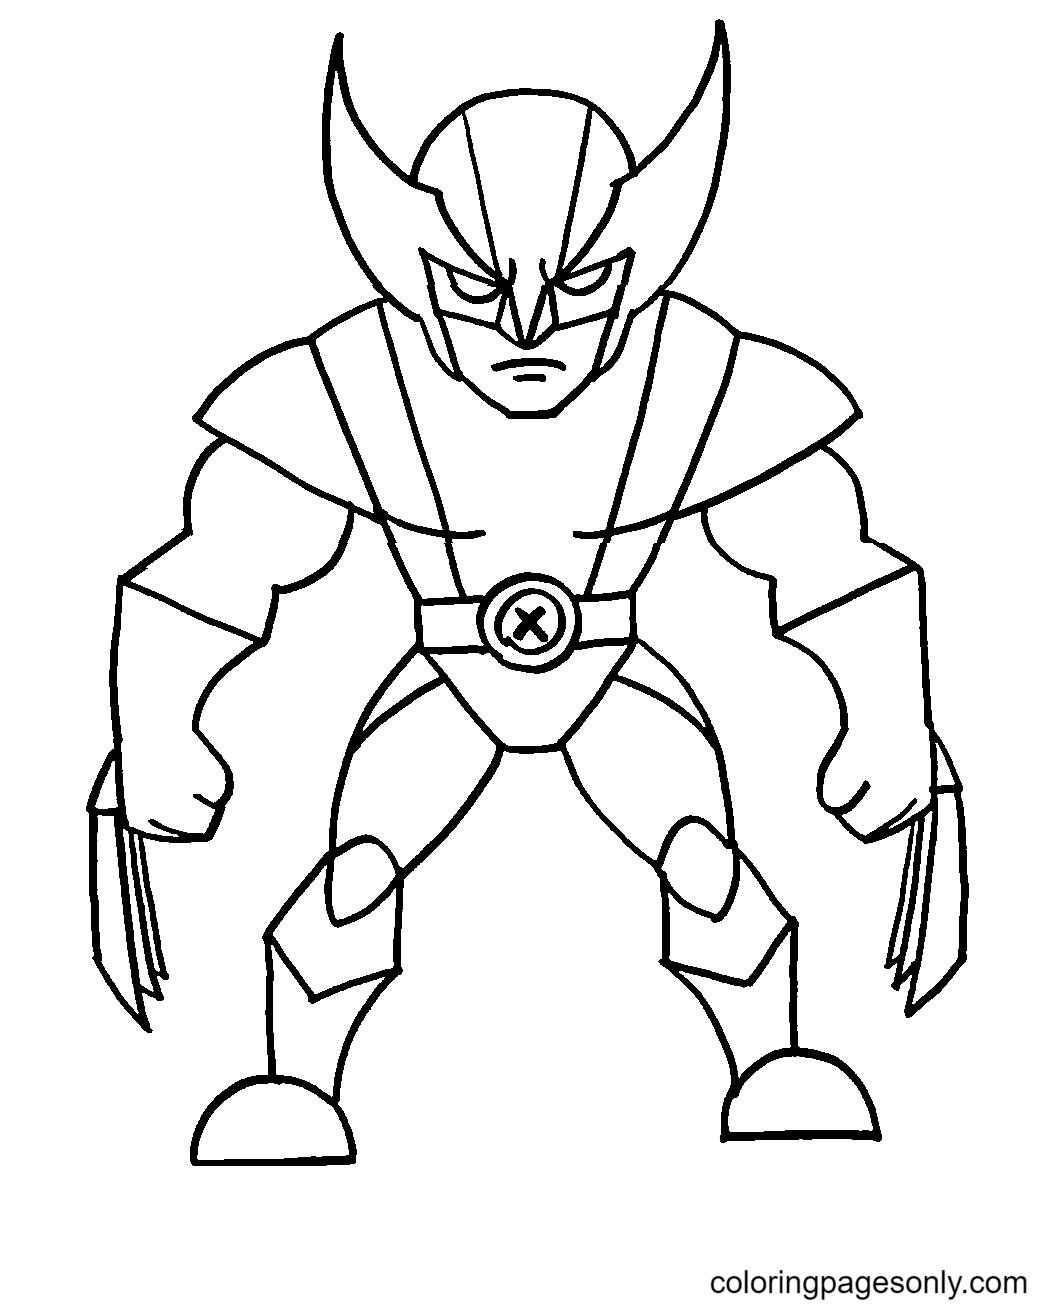 Wolverine coloring pages printable for free download